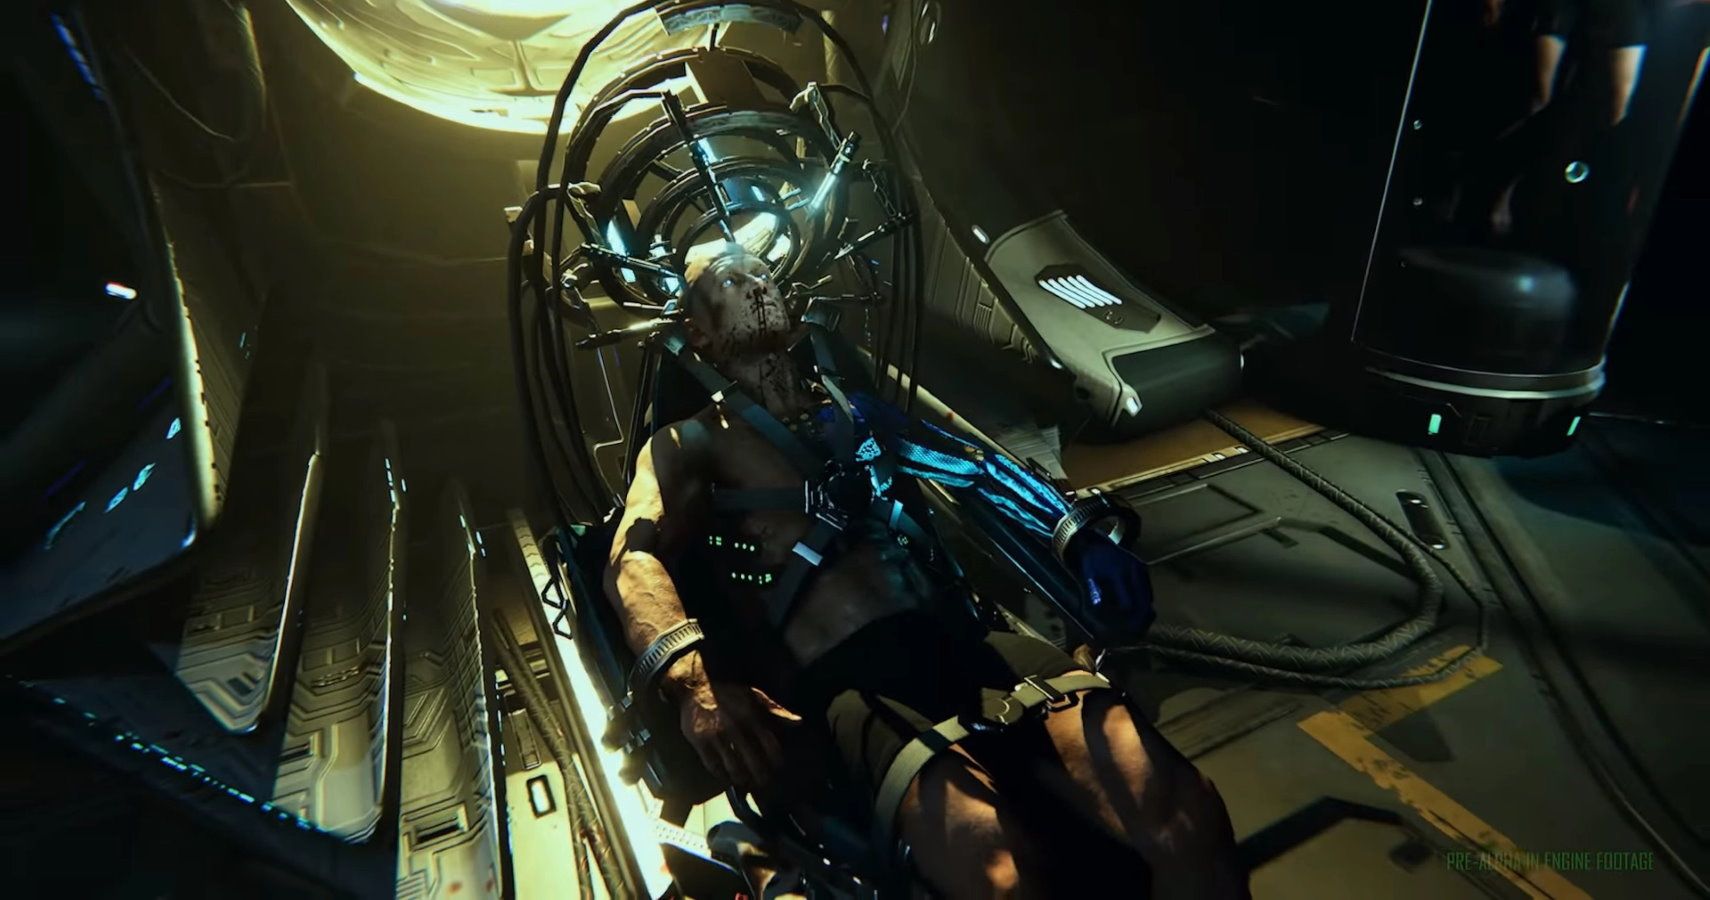 otherside did buy back the publishing rights to system shock 3 from starbreeze for $12m